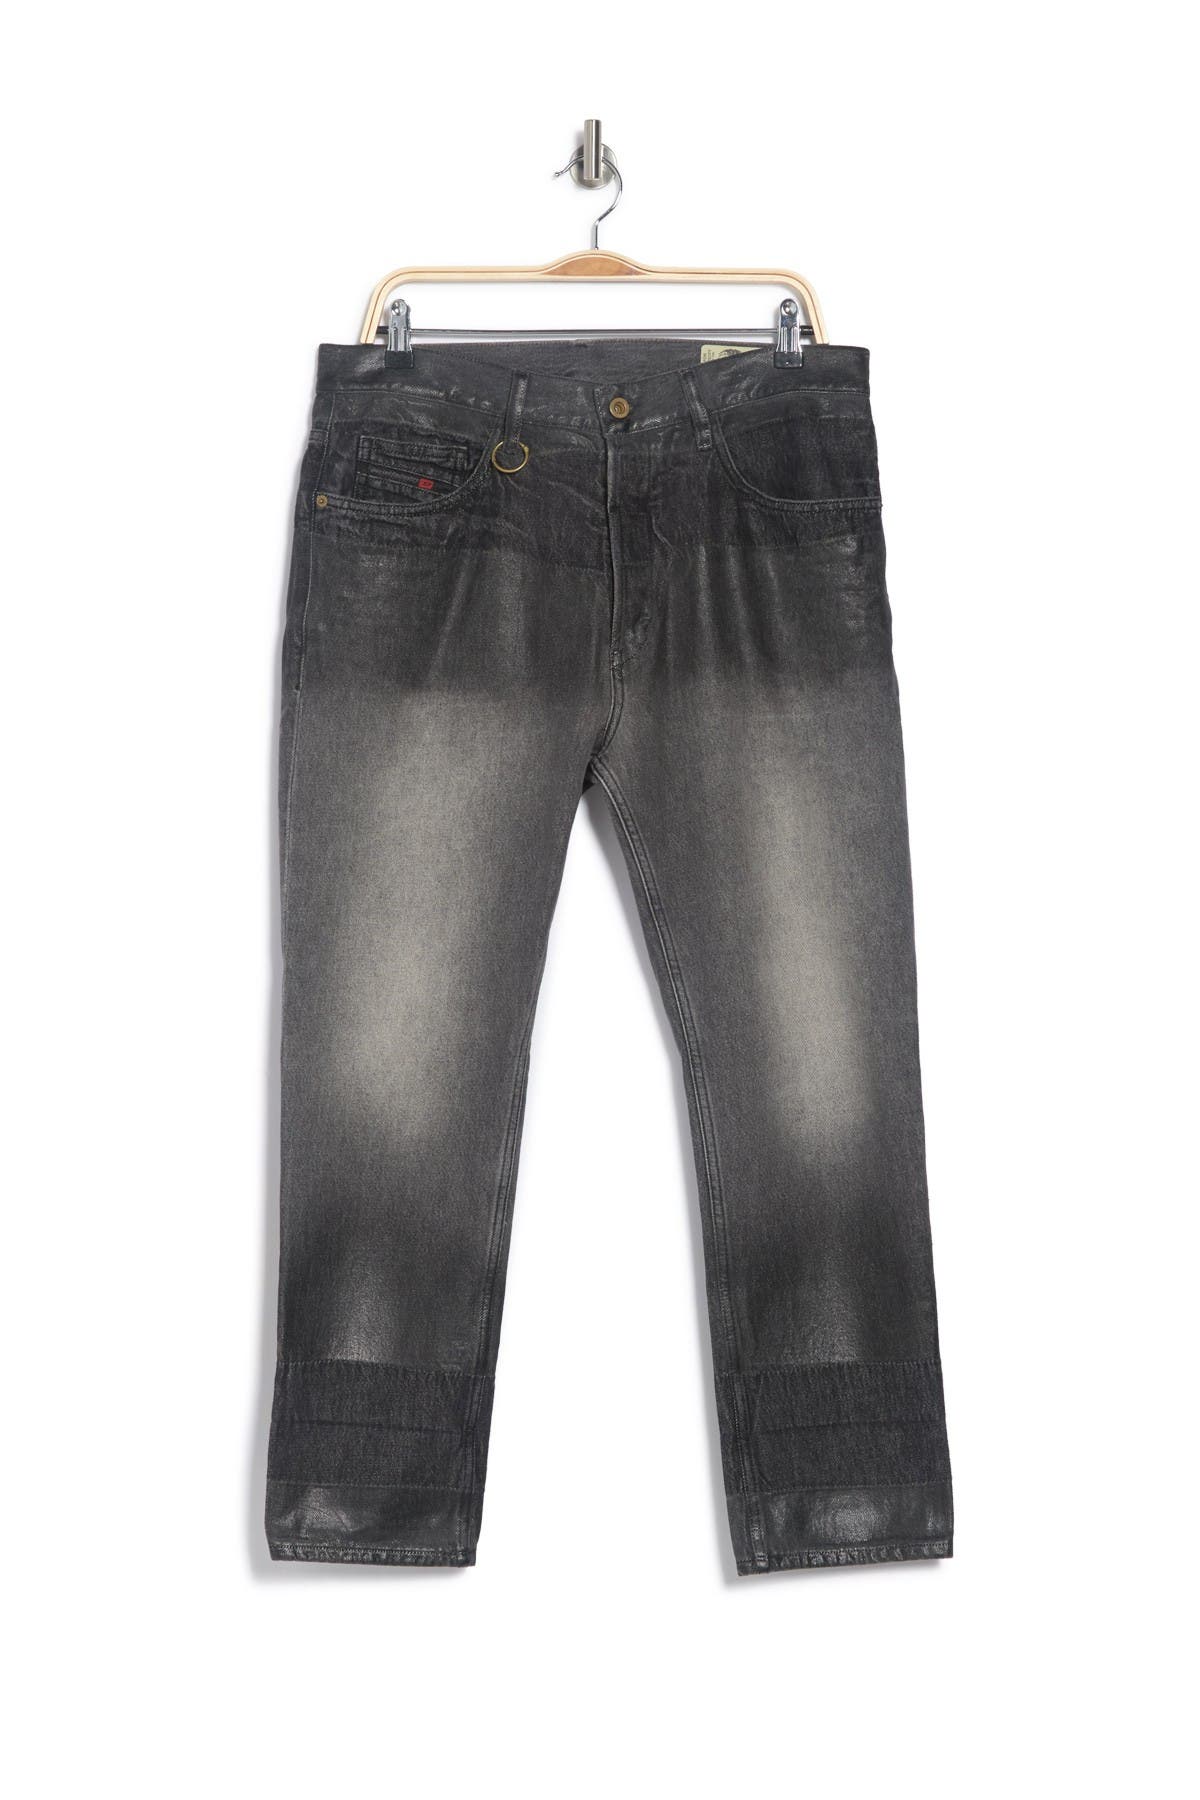 Diesel D-aygle Straight Leg Cropped Jeans In Oxford6